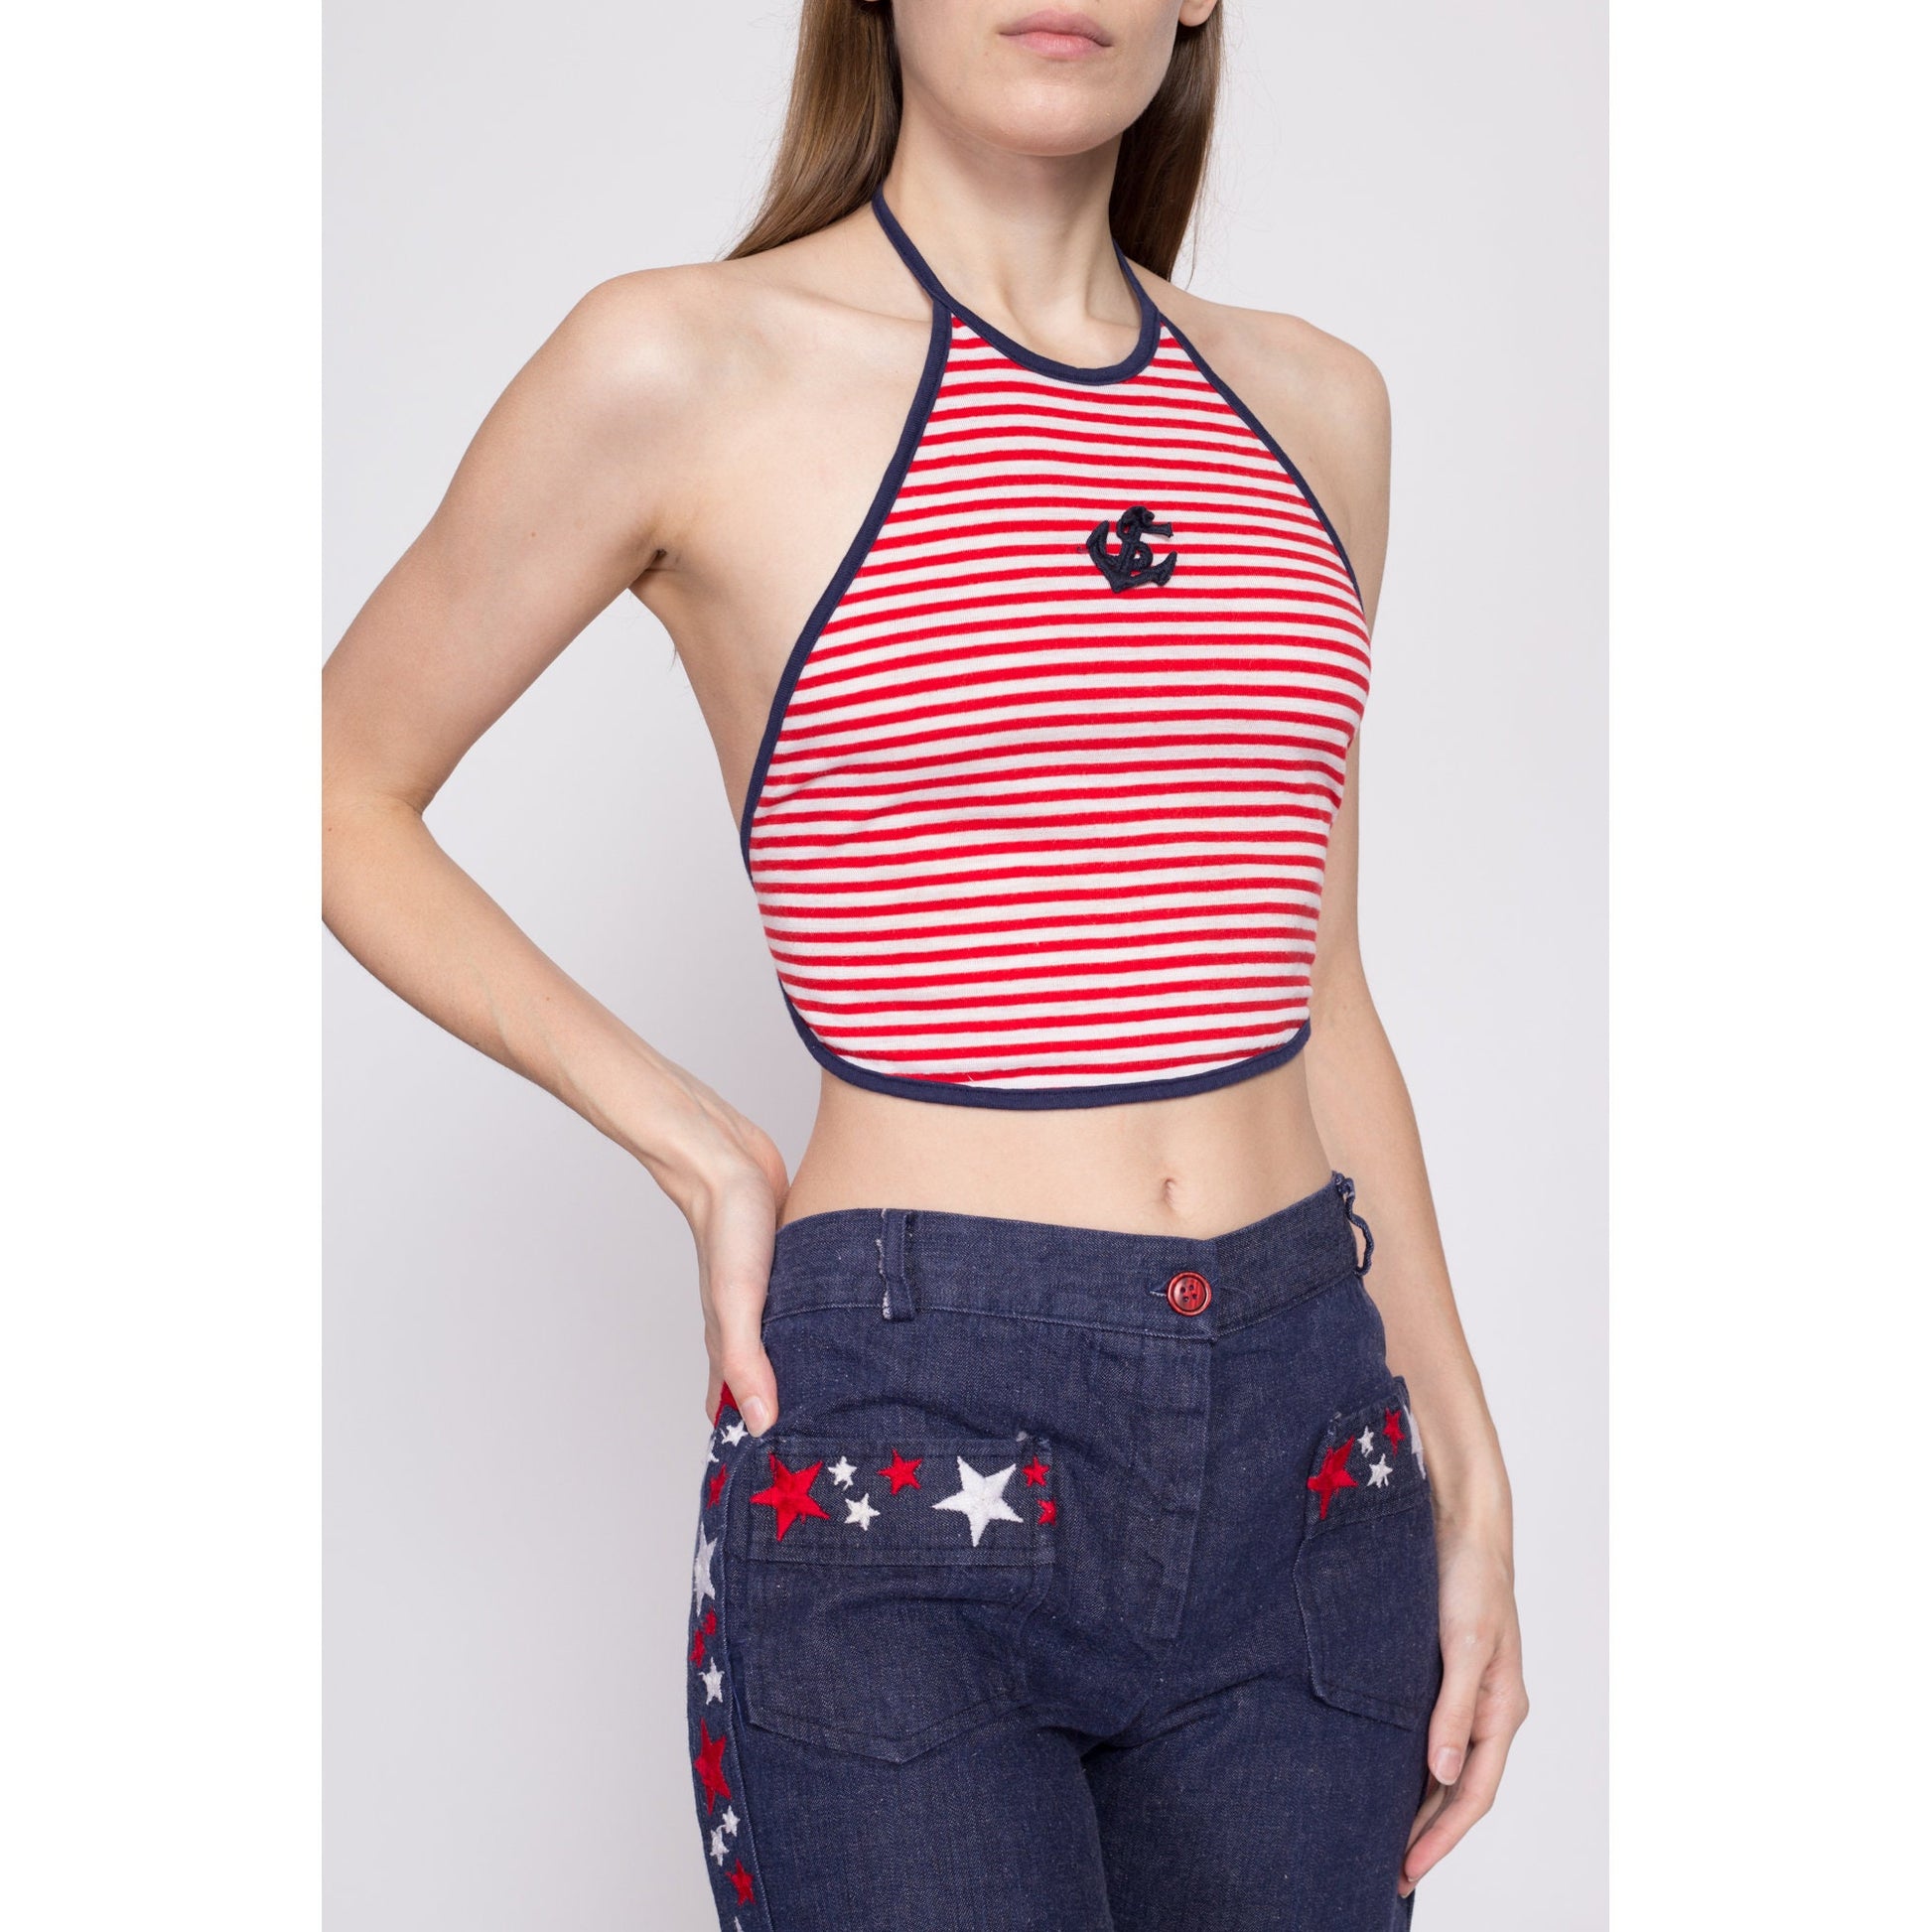 70s Nautical Striped Backless Halter Crop Top - Small